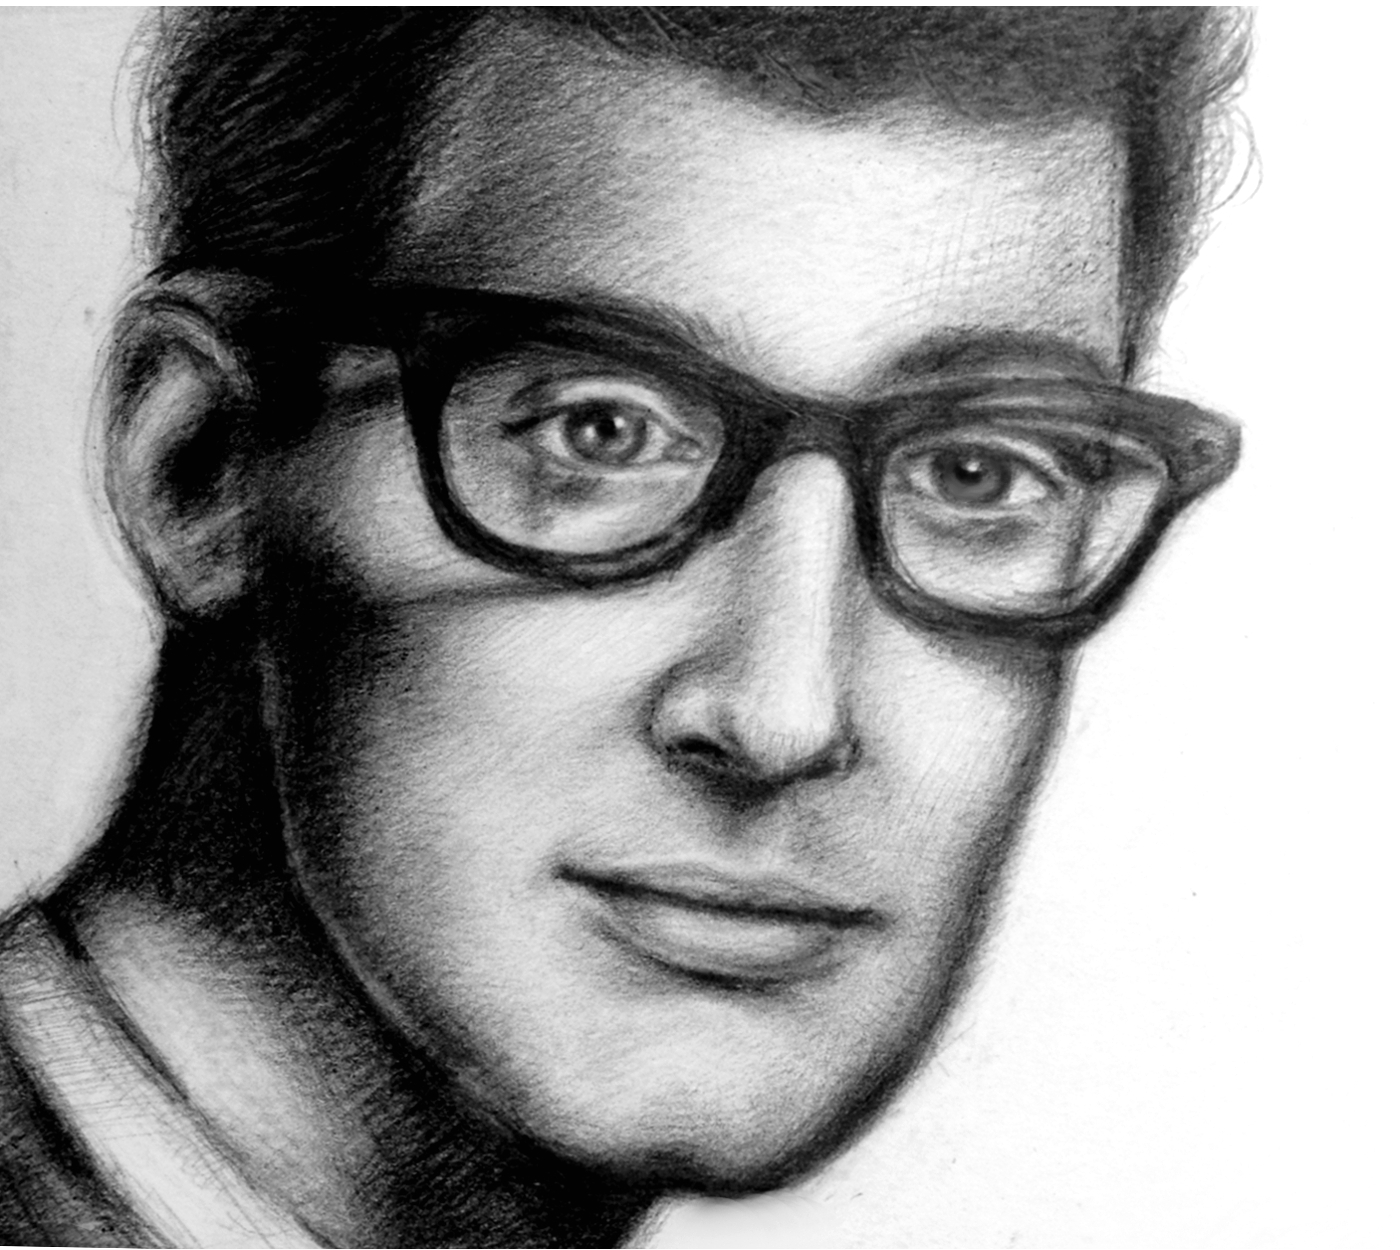 More Buddy Holly Wallpaper